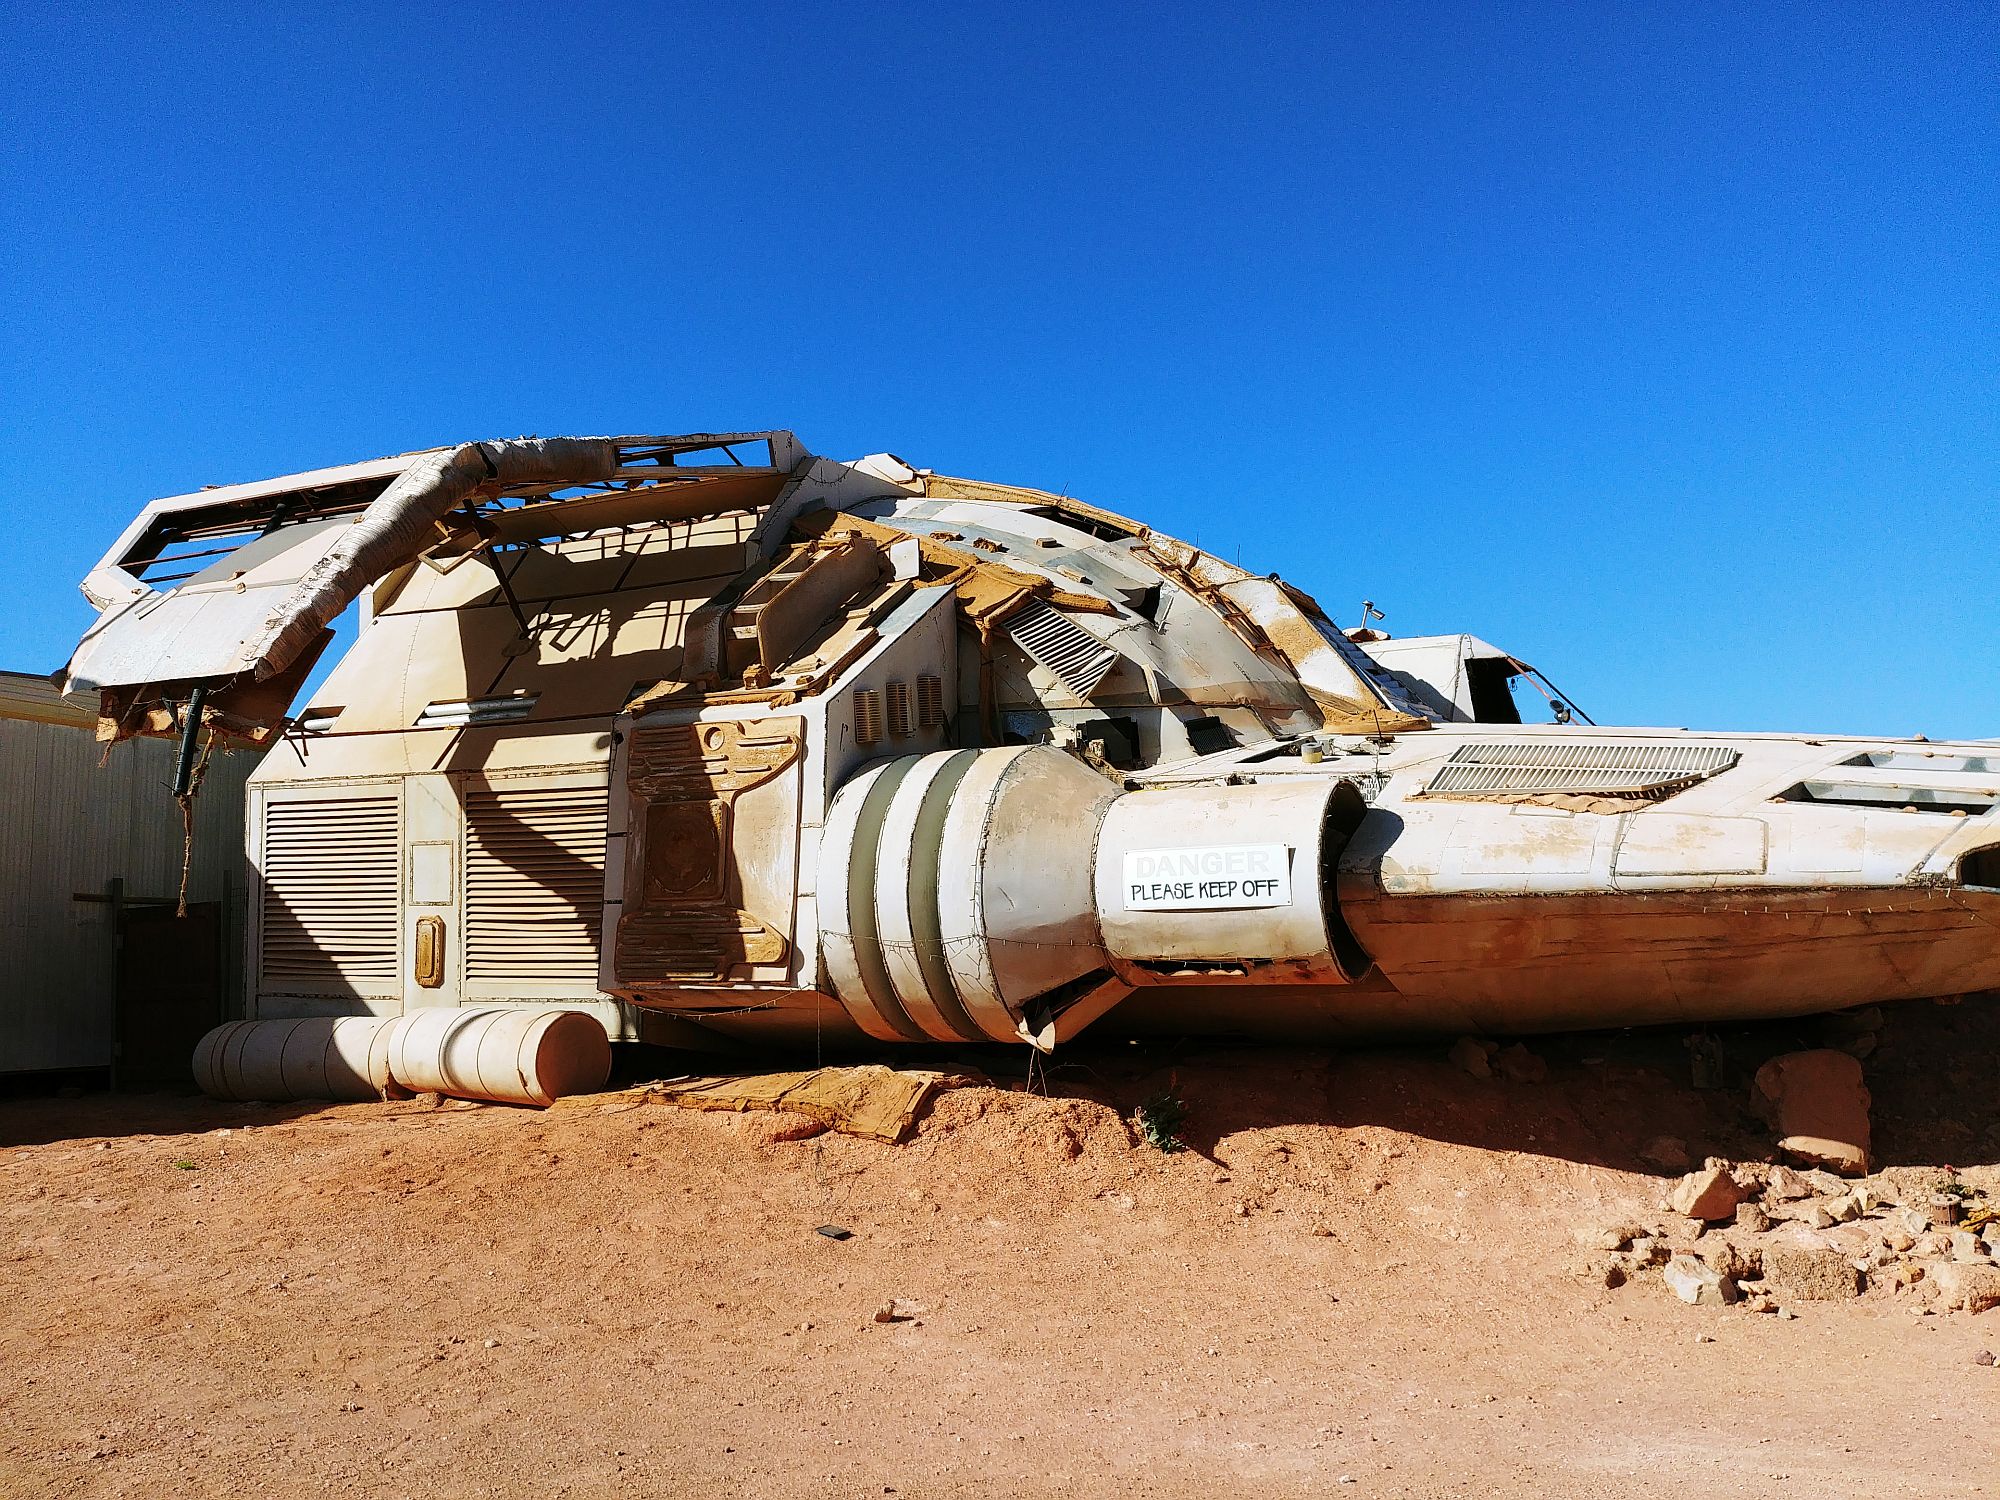 Coober Pedy - Spaceship by day